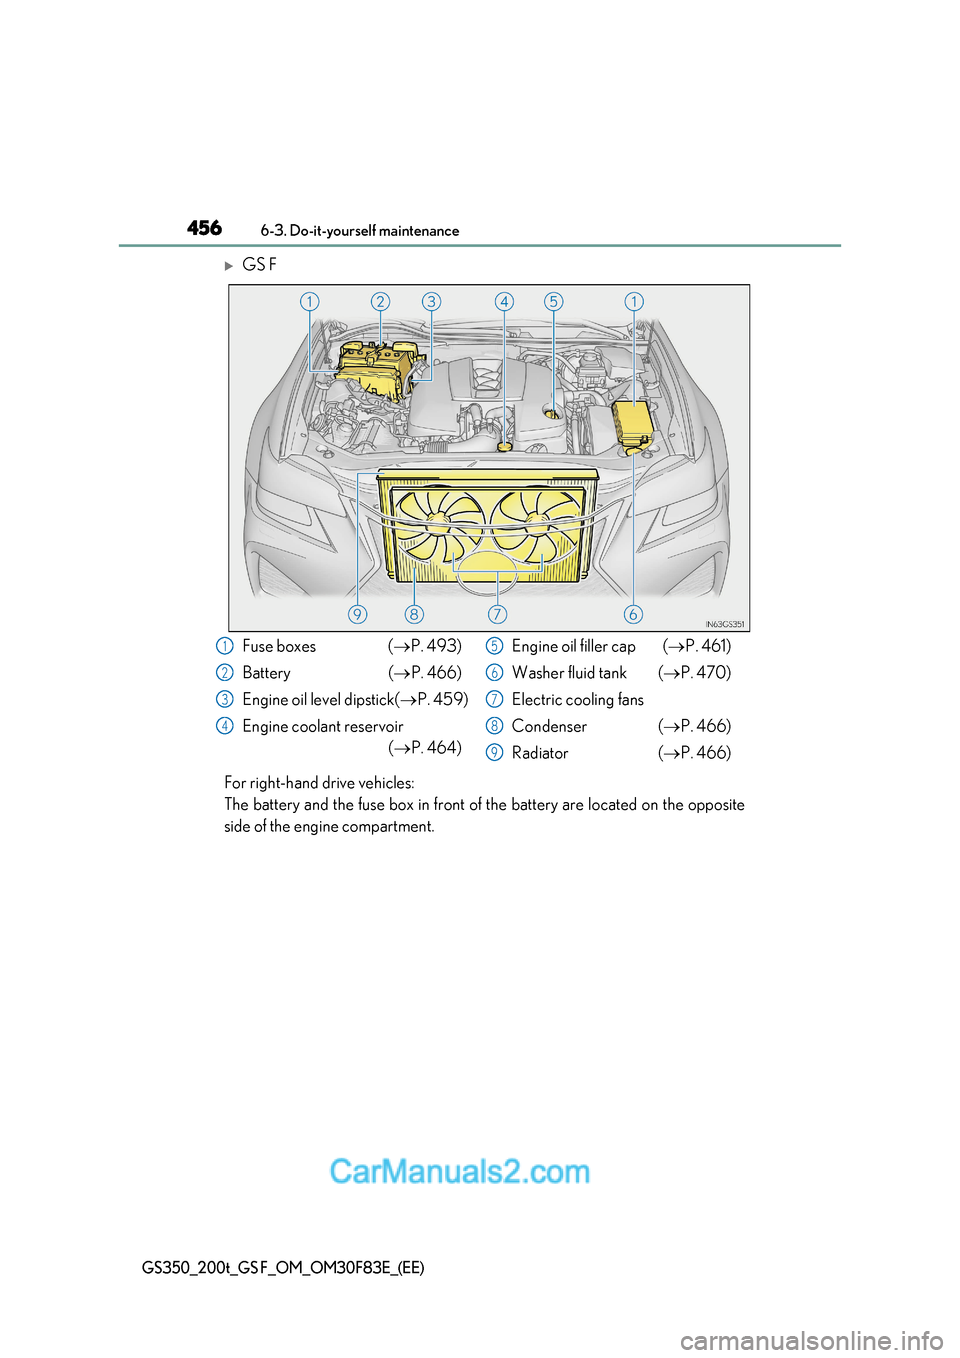 Lexus GS350 2017  Owners Manual 4566-3. Do-it-yourself maintenance
GS350_200t_GS F_OM_OM30F83E_(EE)
GS F
For right-hand drive vehicles:  
The battery and the fuse box in front of the battery are located on the opposite 
side of t